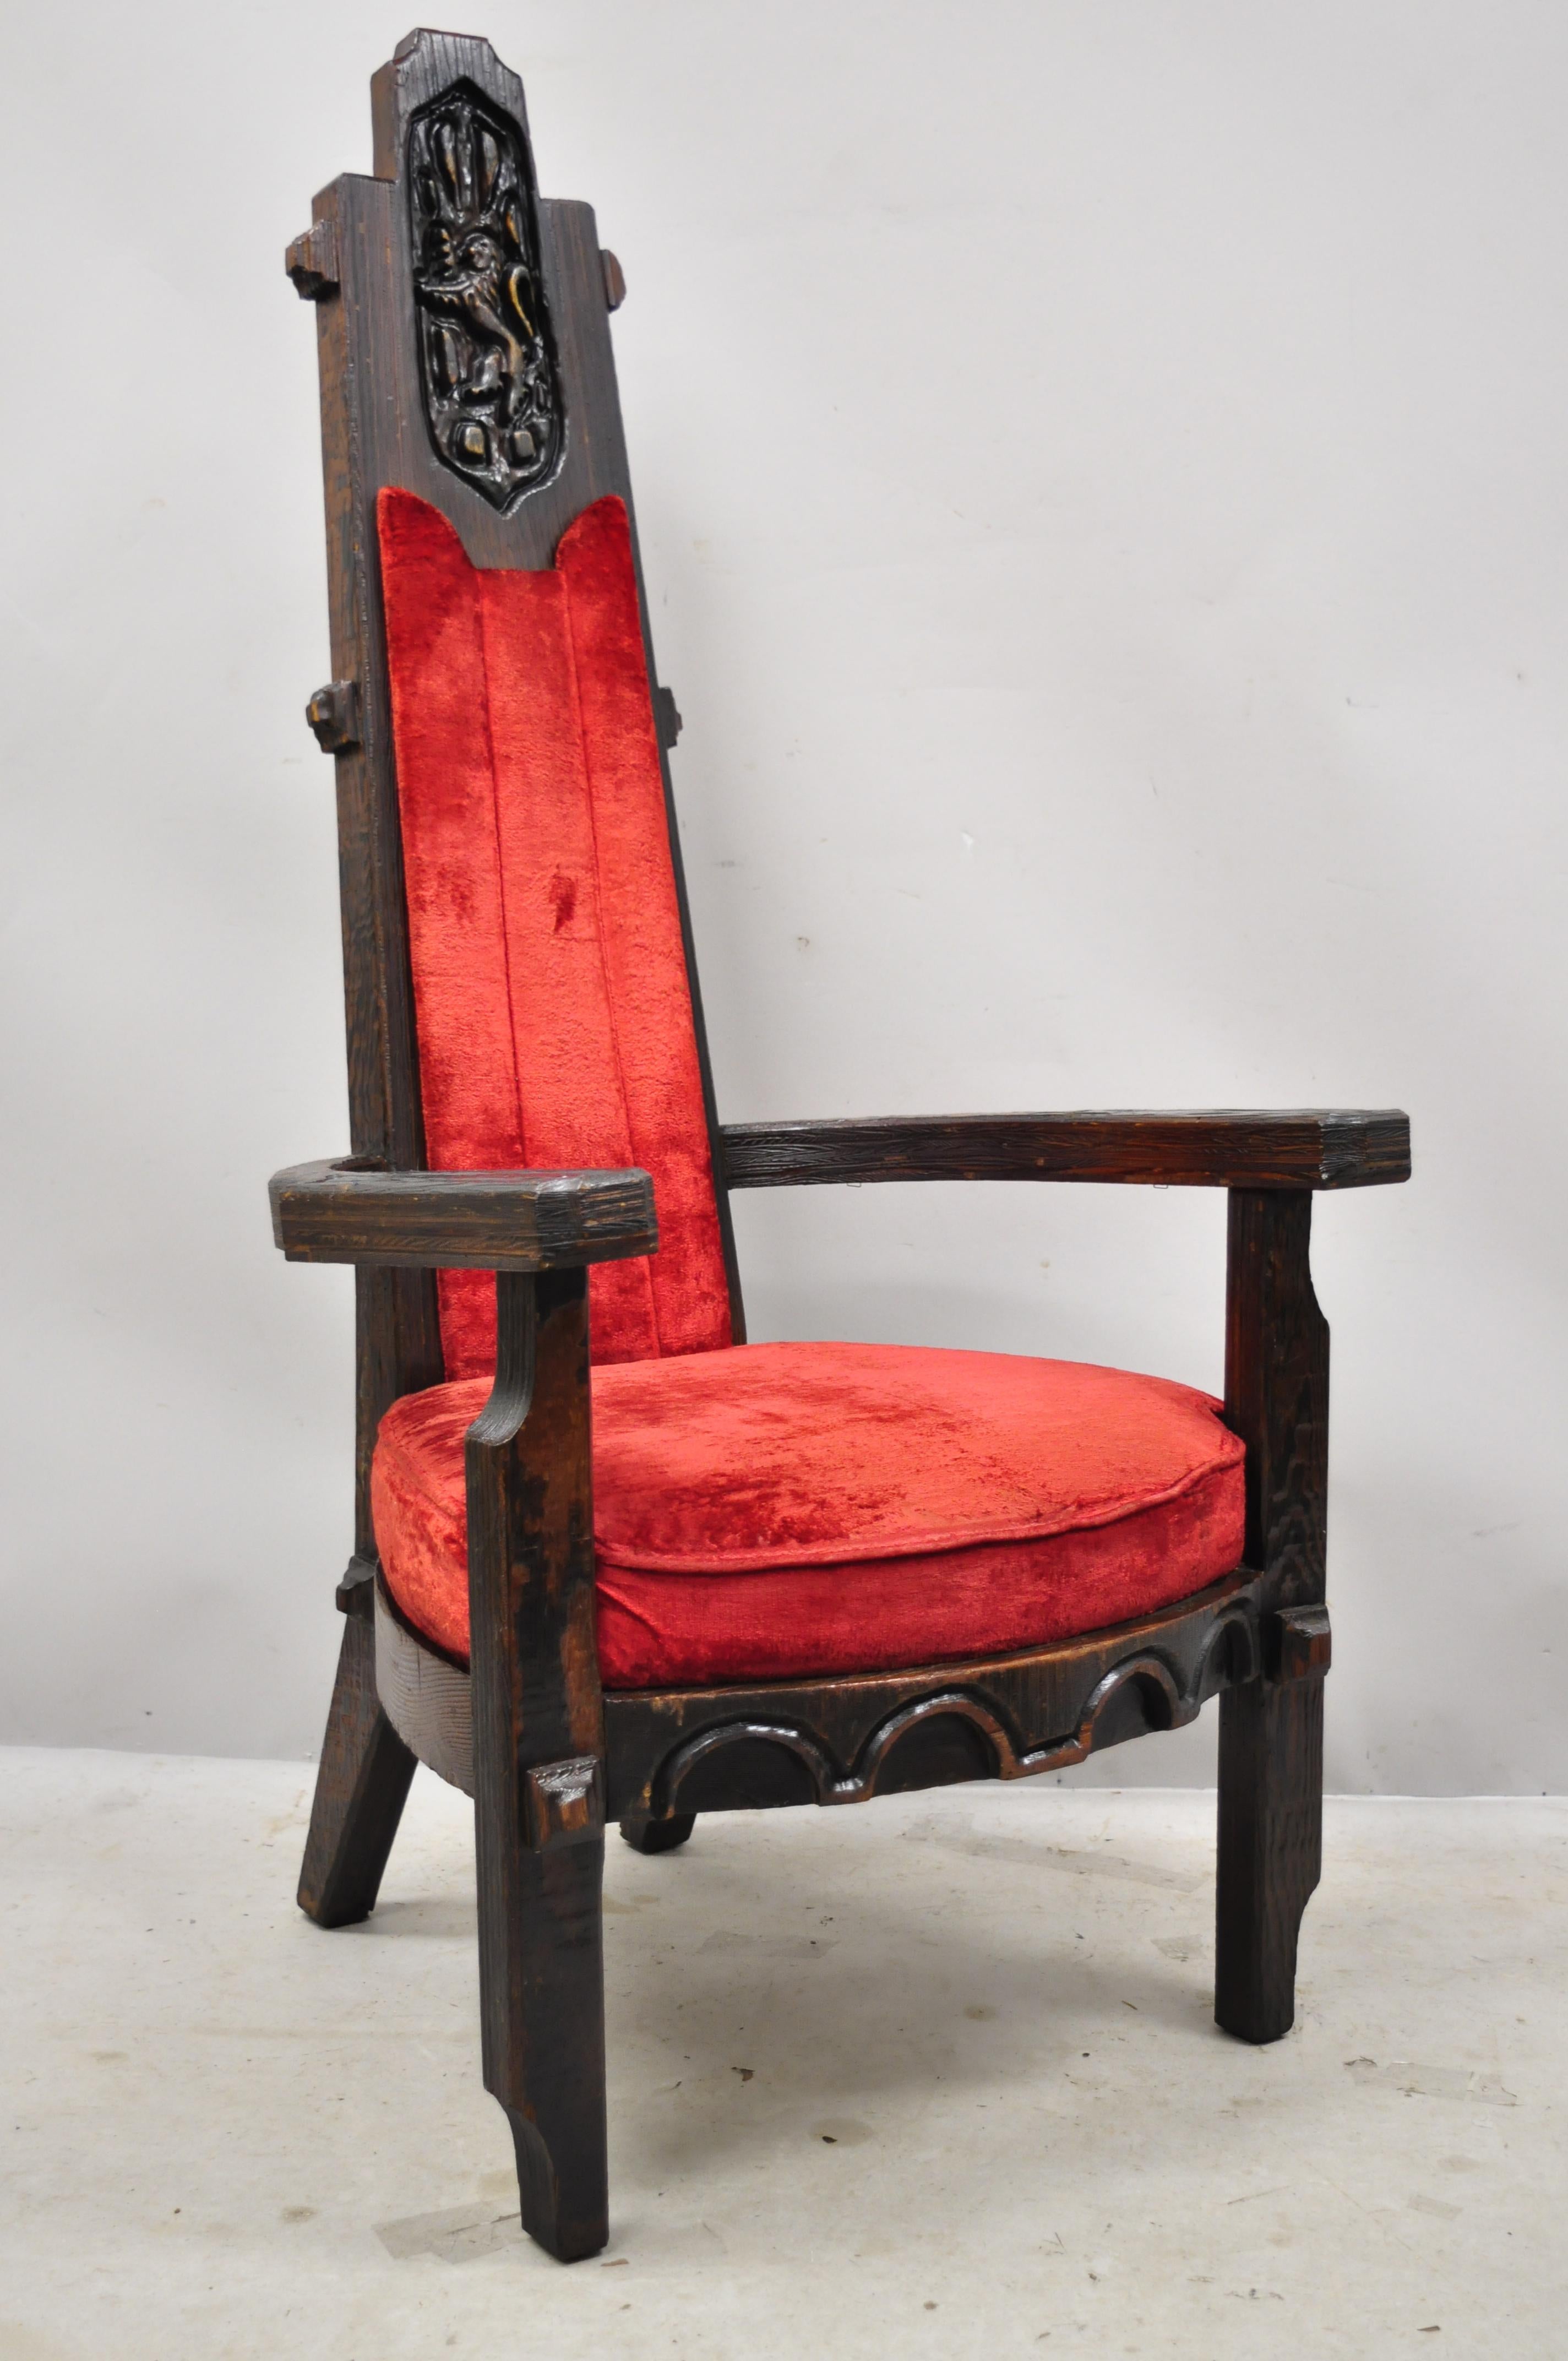 Maderas De Santa Barbara Gothic Revival Elvis Jungle Room style Throne armchair. Item features a tall back, original red upholstery, solid wood construction, distressed finish, nicely carved details, original label, very nice vintage item, great